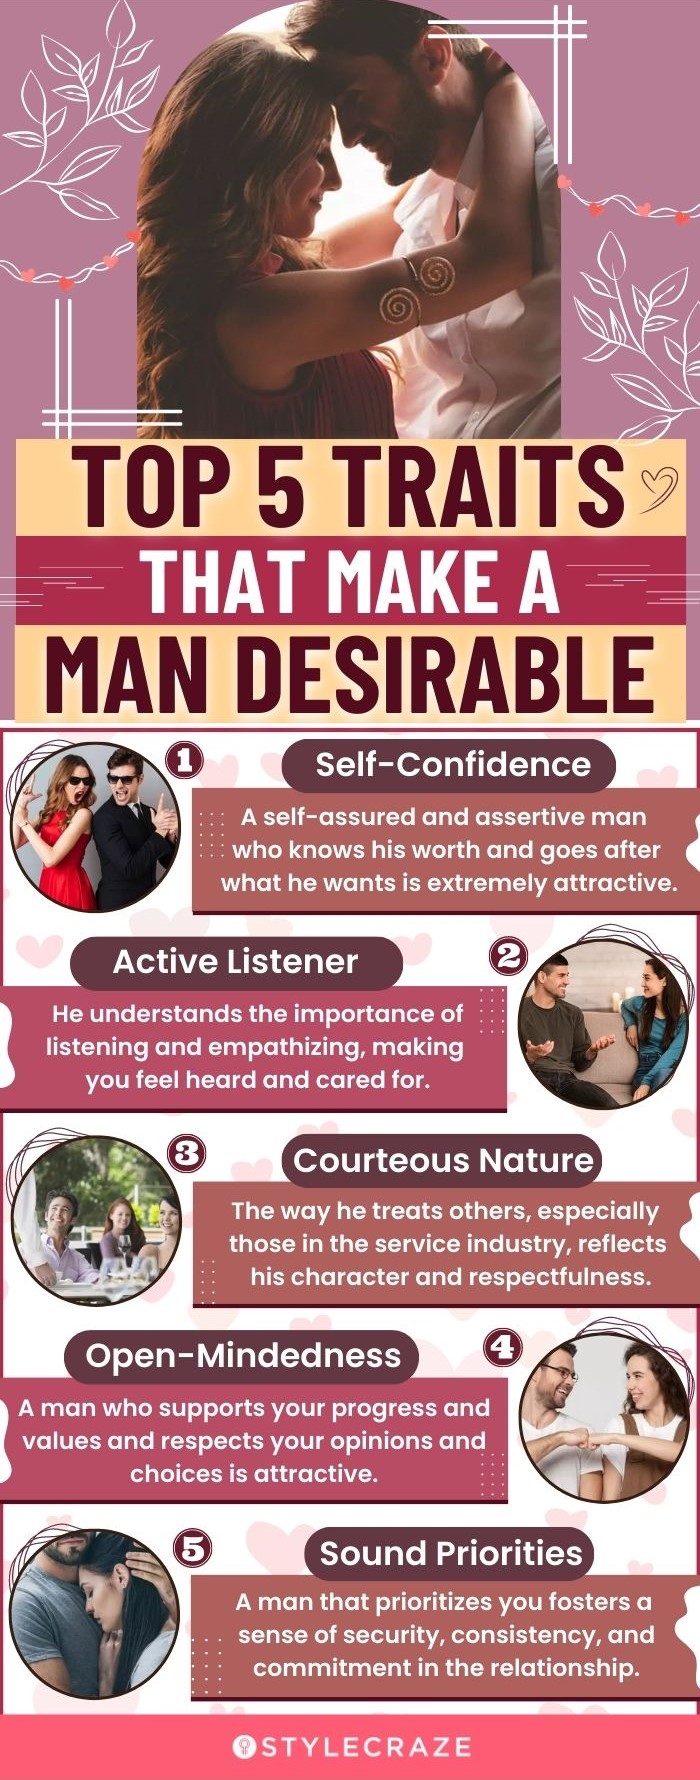 What Men Want in a Relationship [Top 5 Irrresistable Traits]